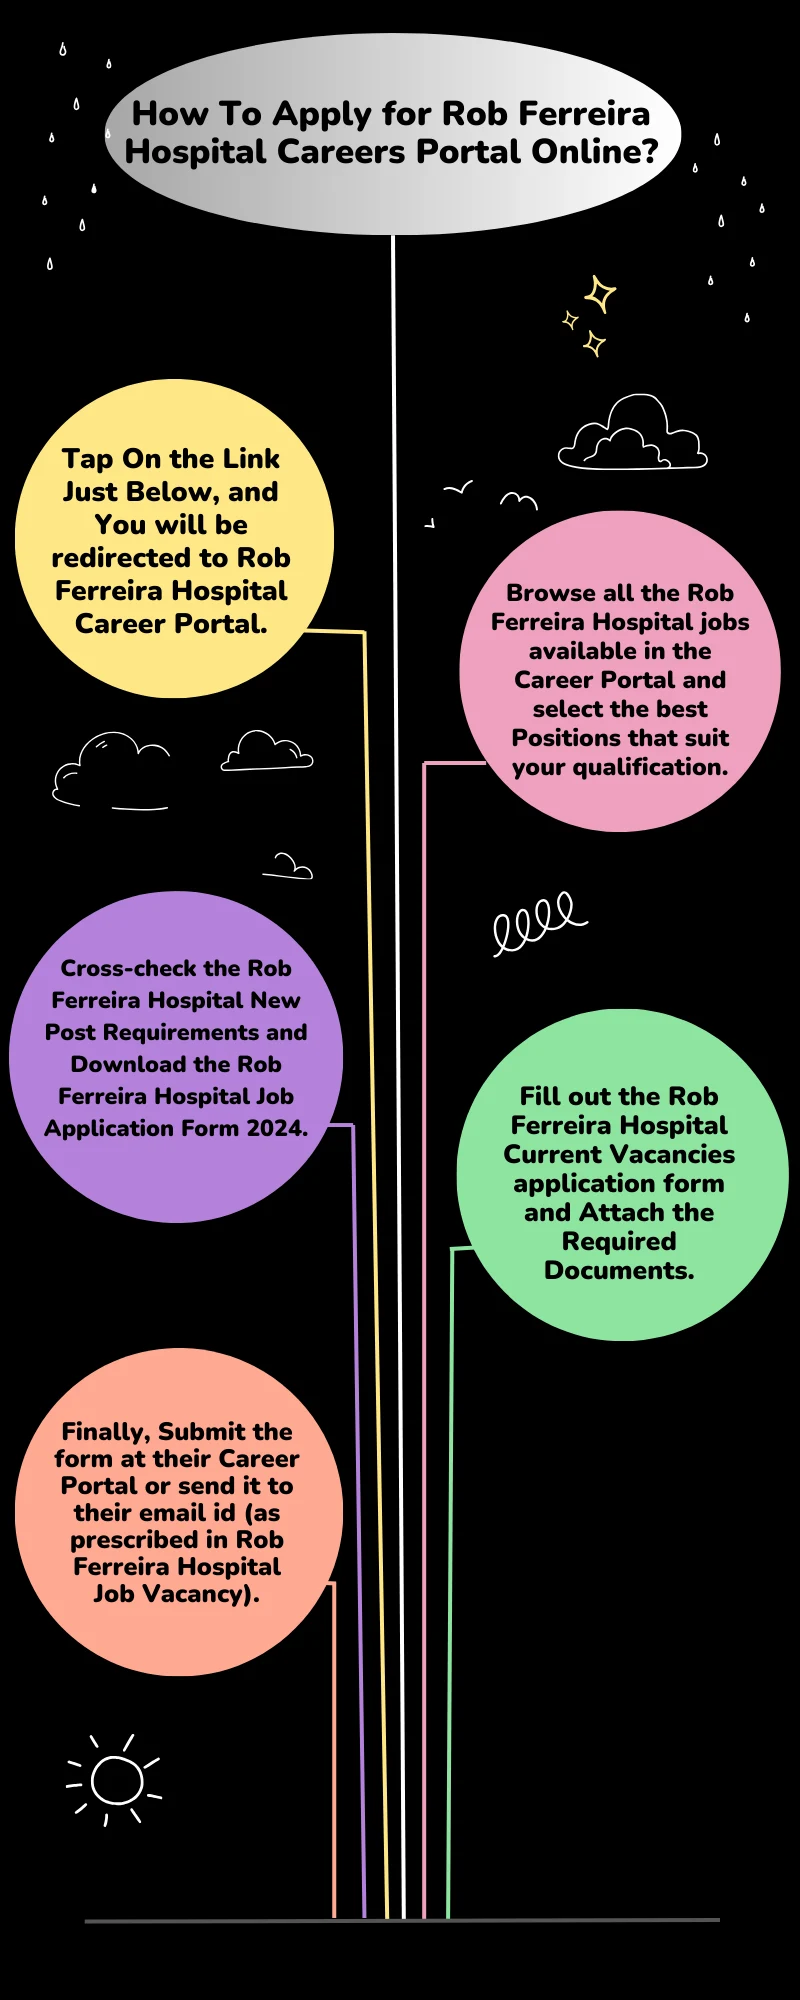 How To Apply for Rob Ferreira Hospital Careers Portal Online?